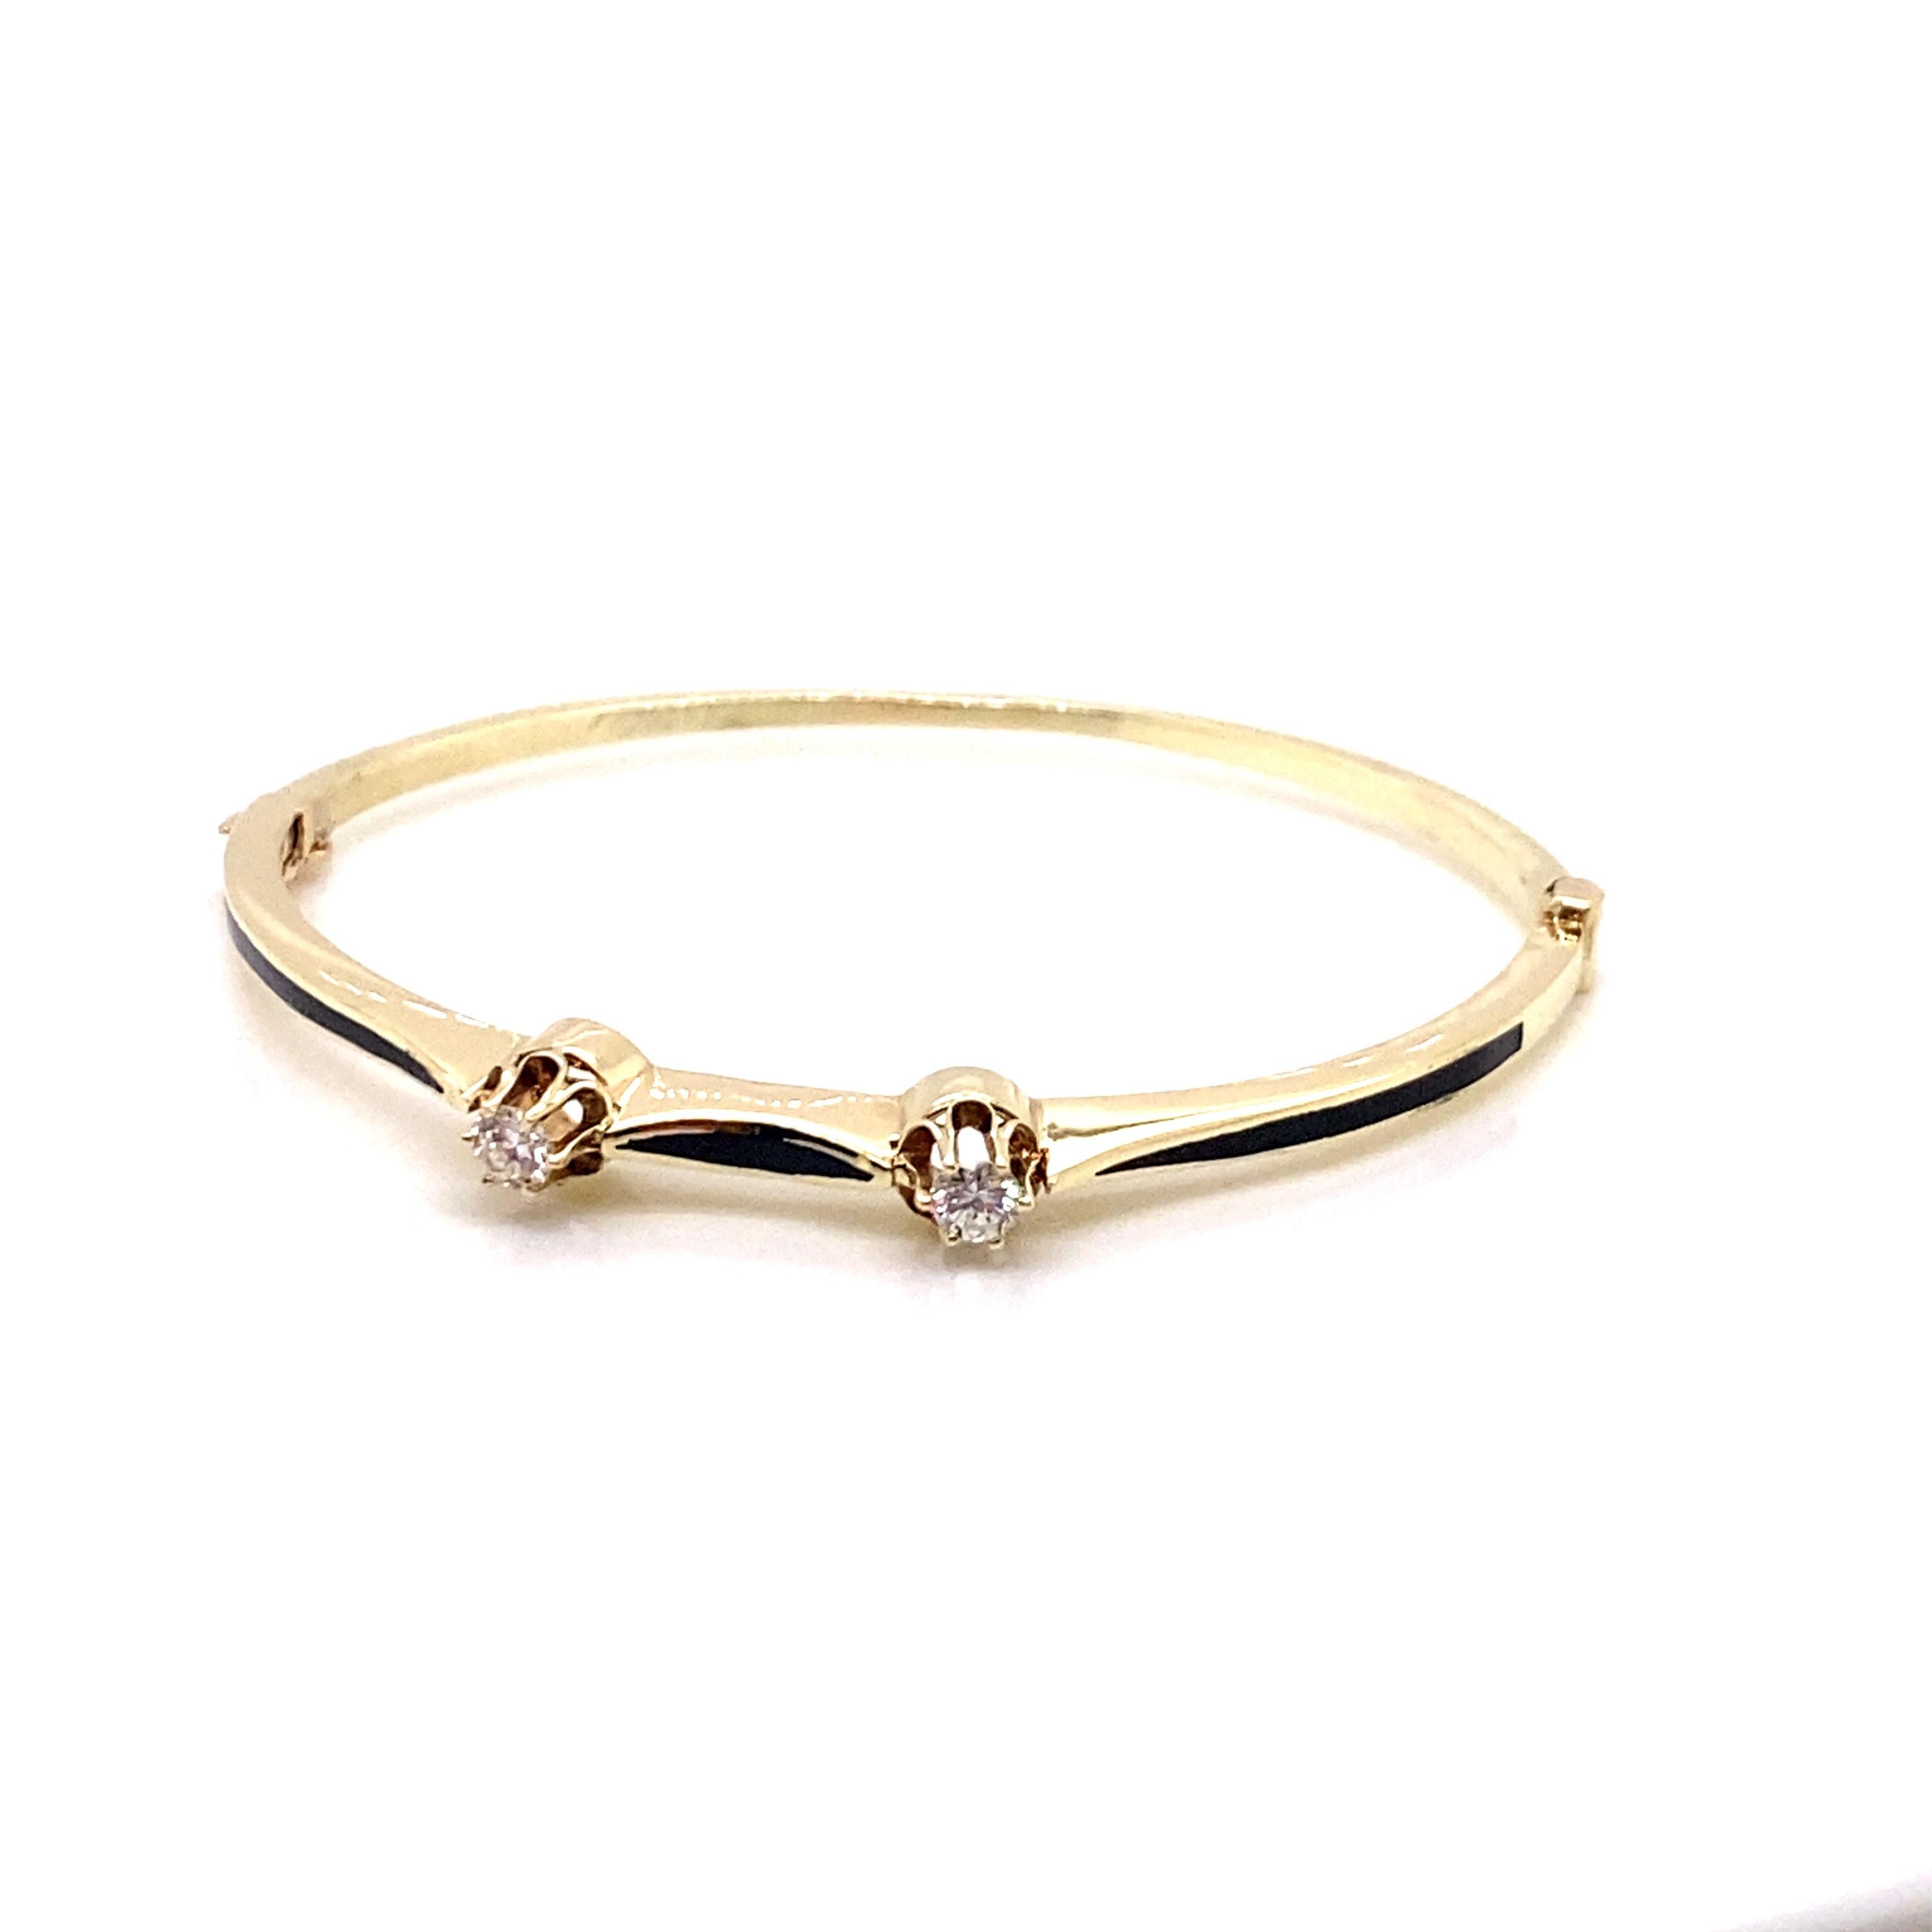 Vintage Victorian Reproduction Diamond and Black Enamel Bangle - The bangle contains 2 round brilliant diamonds set in 6 prong heads. The total weight is approximately .30ct with G color and VS2 clarity. The inside diameter is 1.75 inches high by